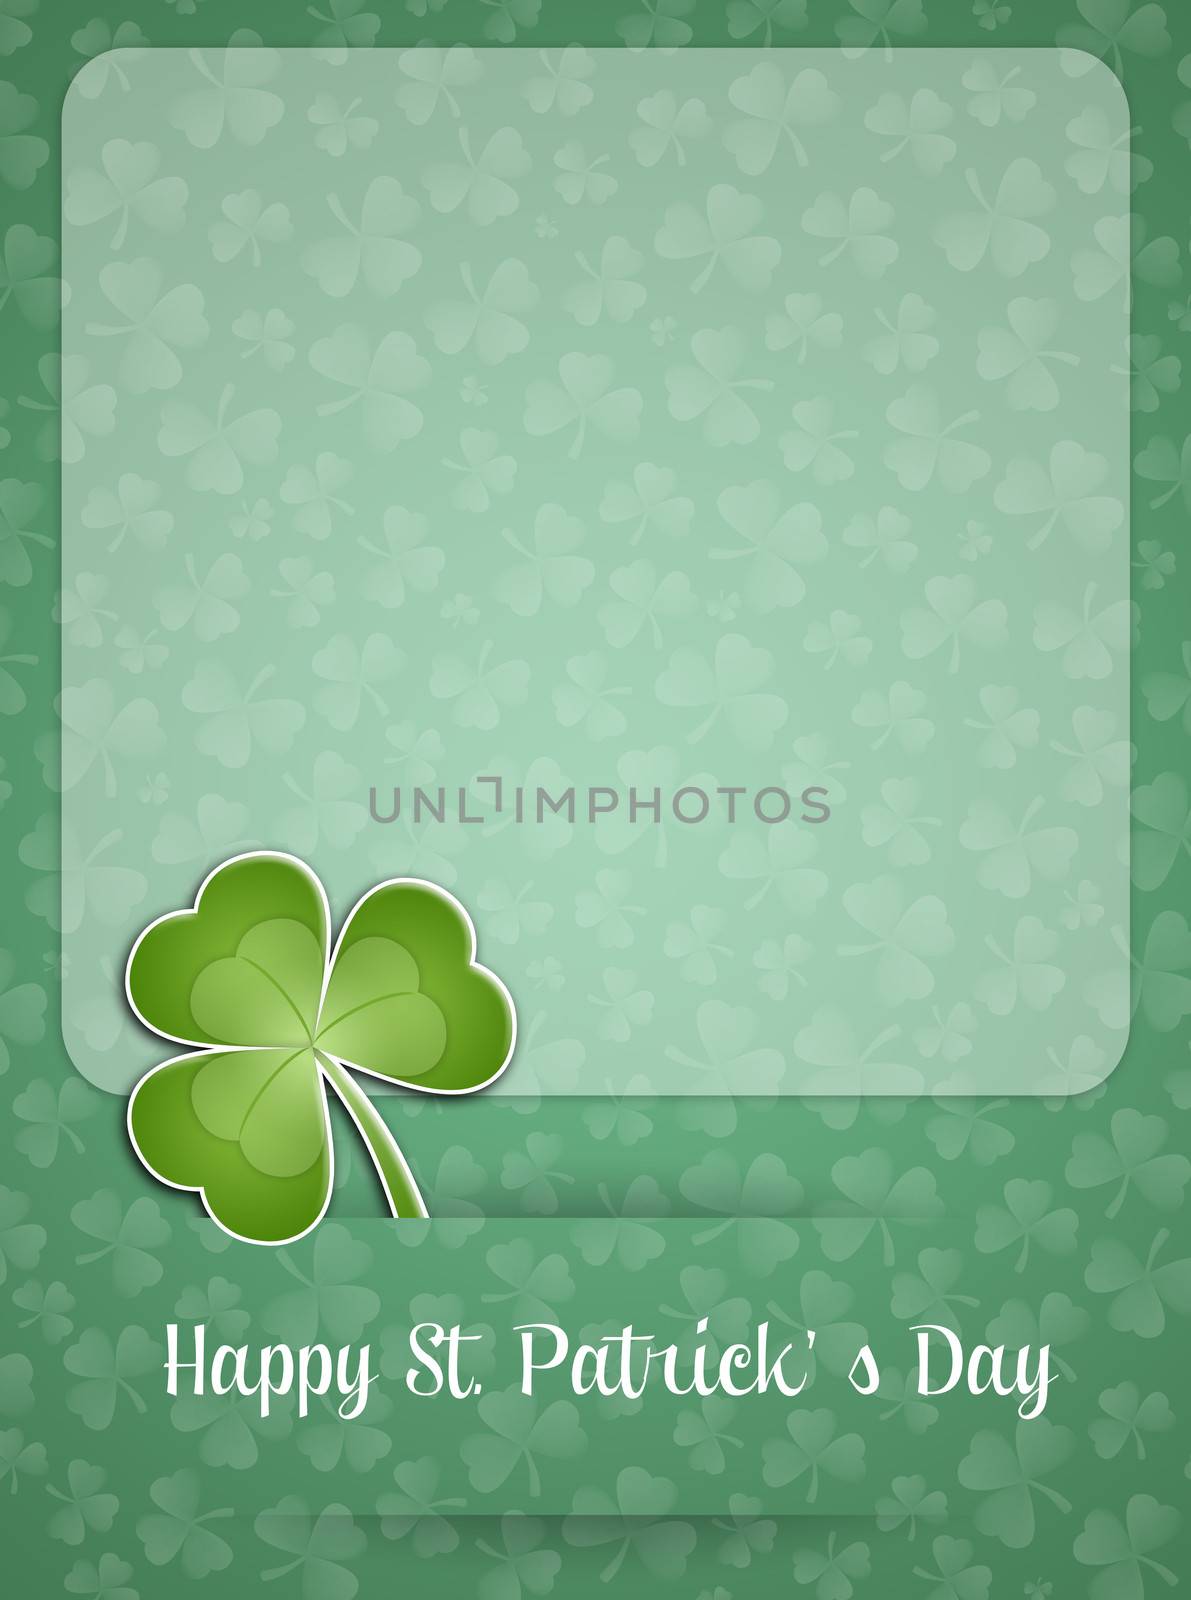 Happy St. Patrick's Day by sognolucido